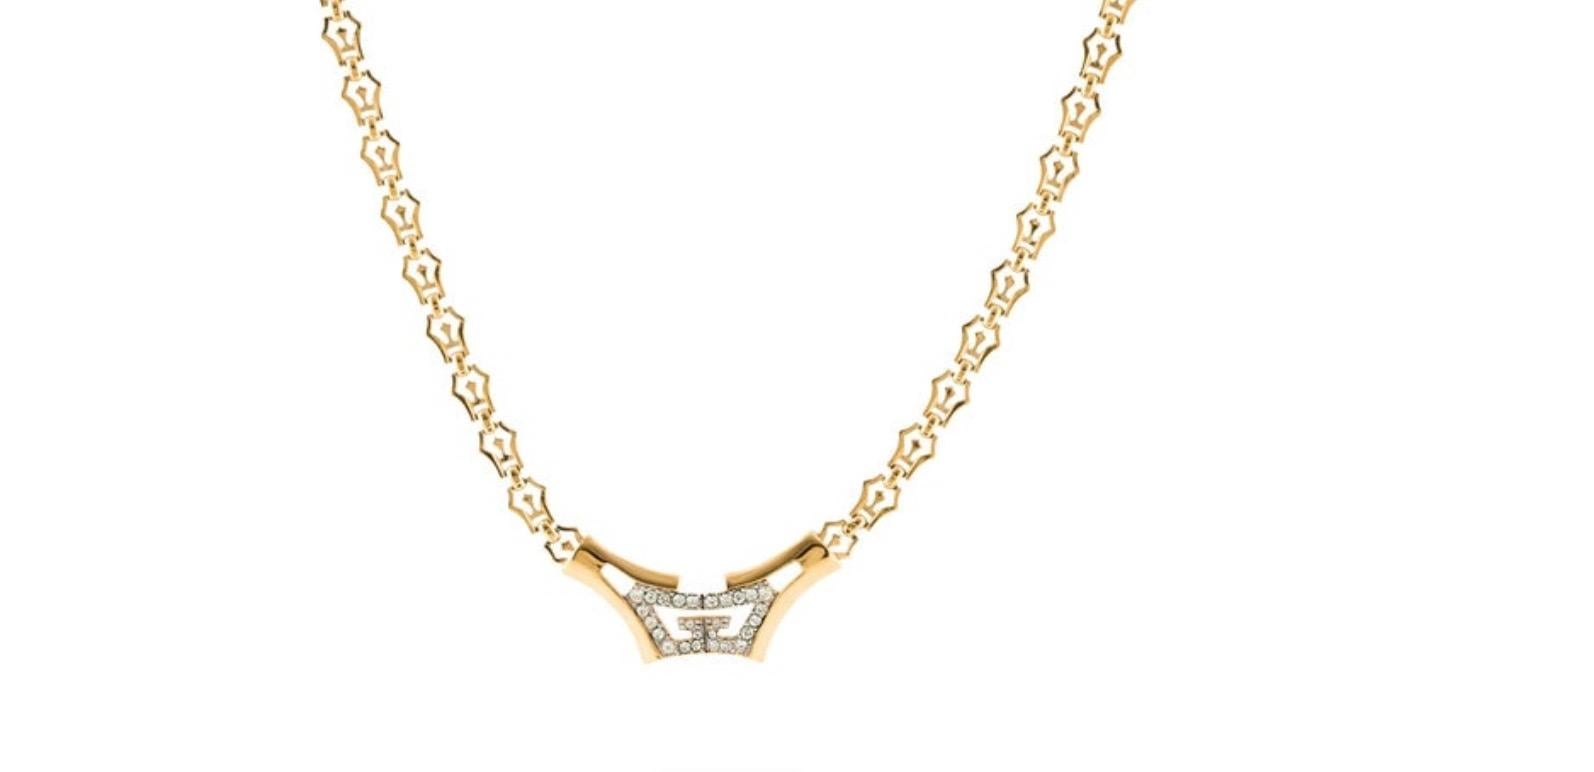 Givenchy Gold Chain GG Charm Pendant Crystal Choker Chain Evening Necklace In Good Condition For Sale In Chicago, IL